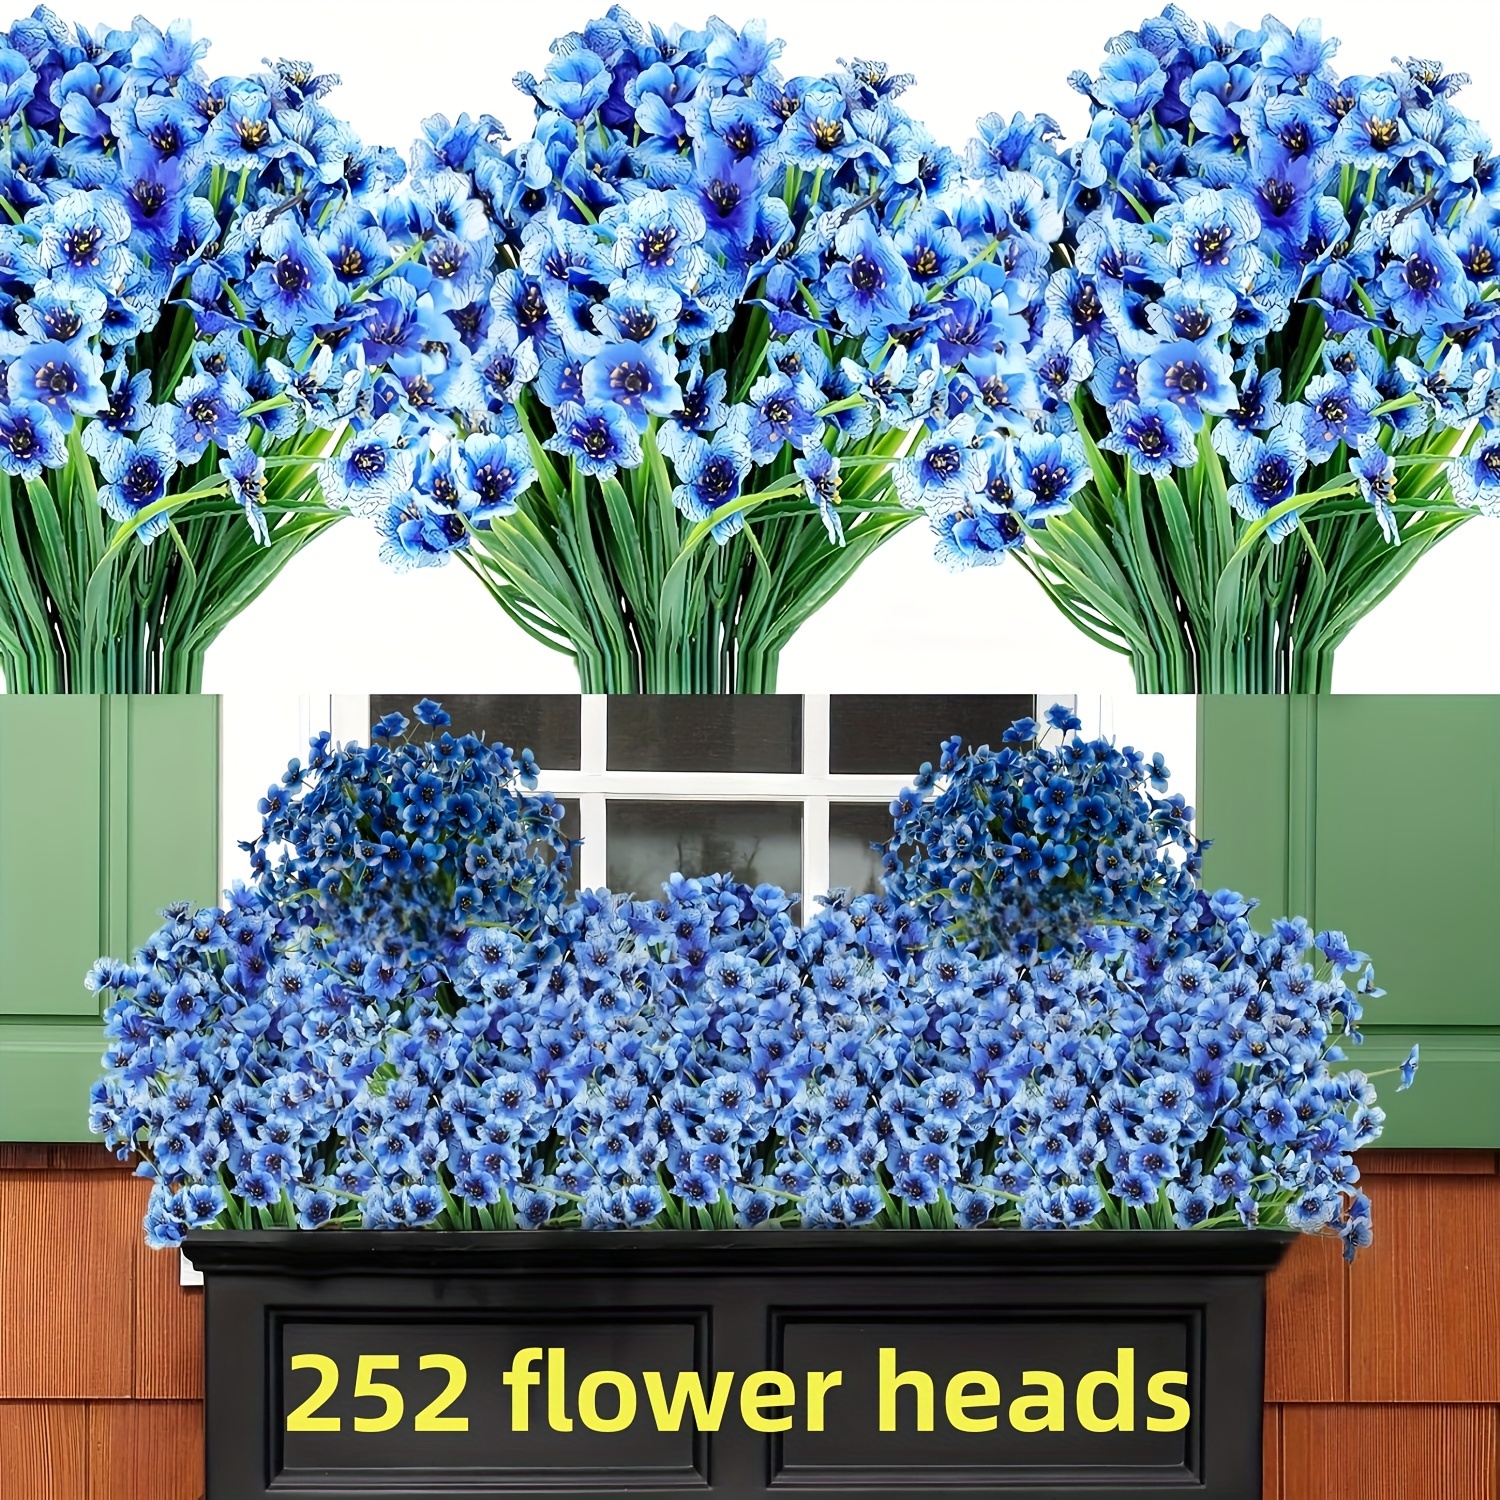 

14pcs Uv-resistant Artificial Blue Flowers Set - Fade-proof Silk Plants For Outdoor/indoor Decor, Perfect For Garden, Patio, Home & Party Decoration - Versatile For All Seasons